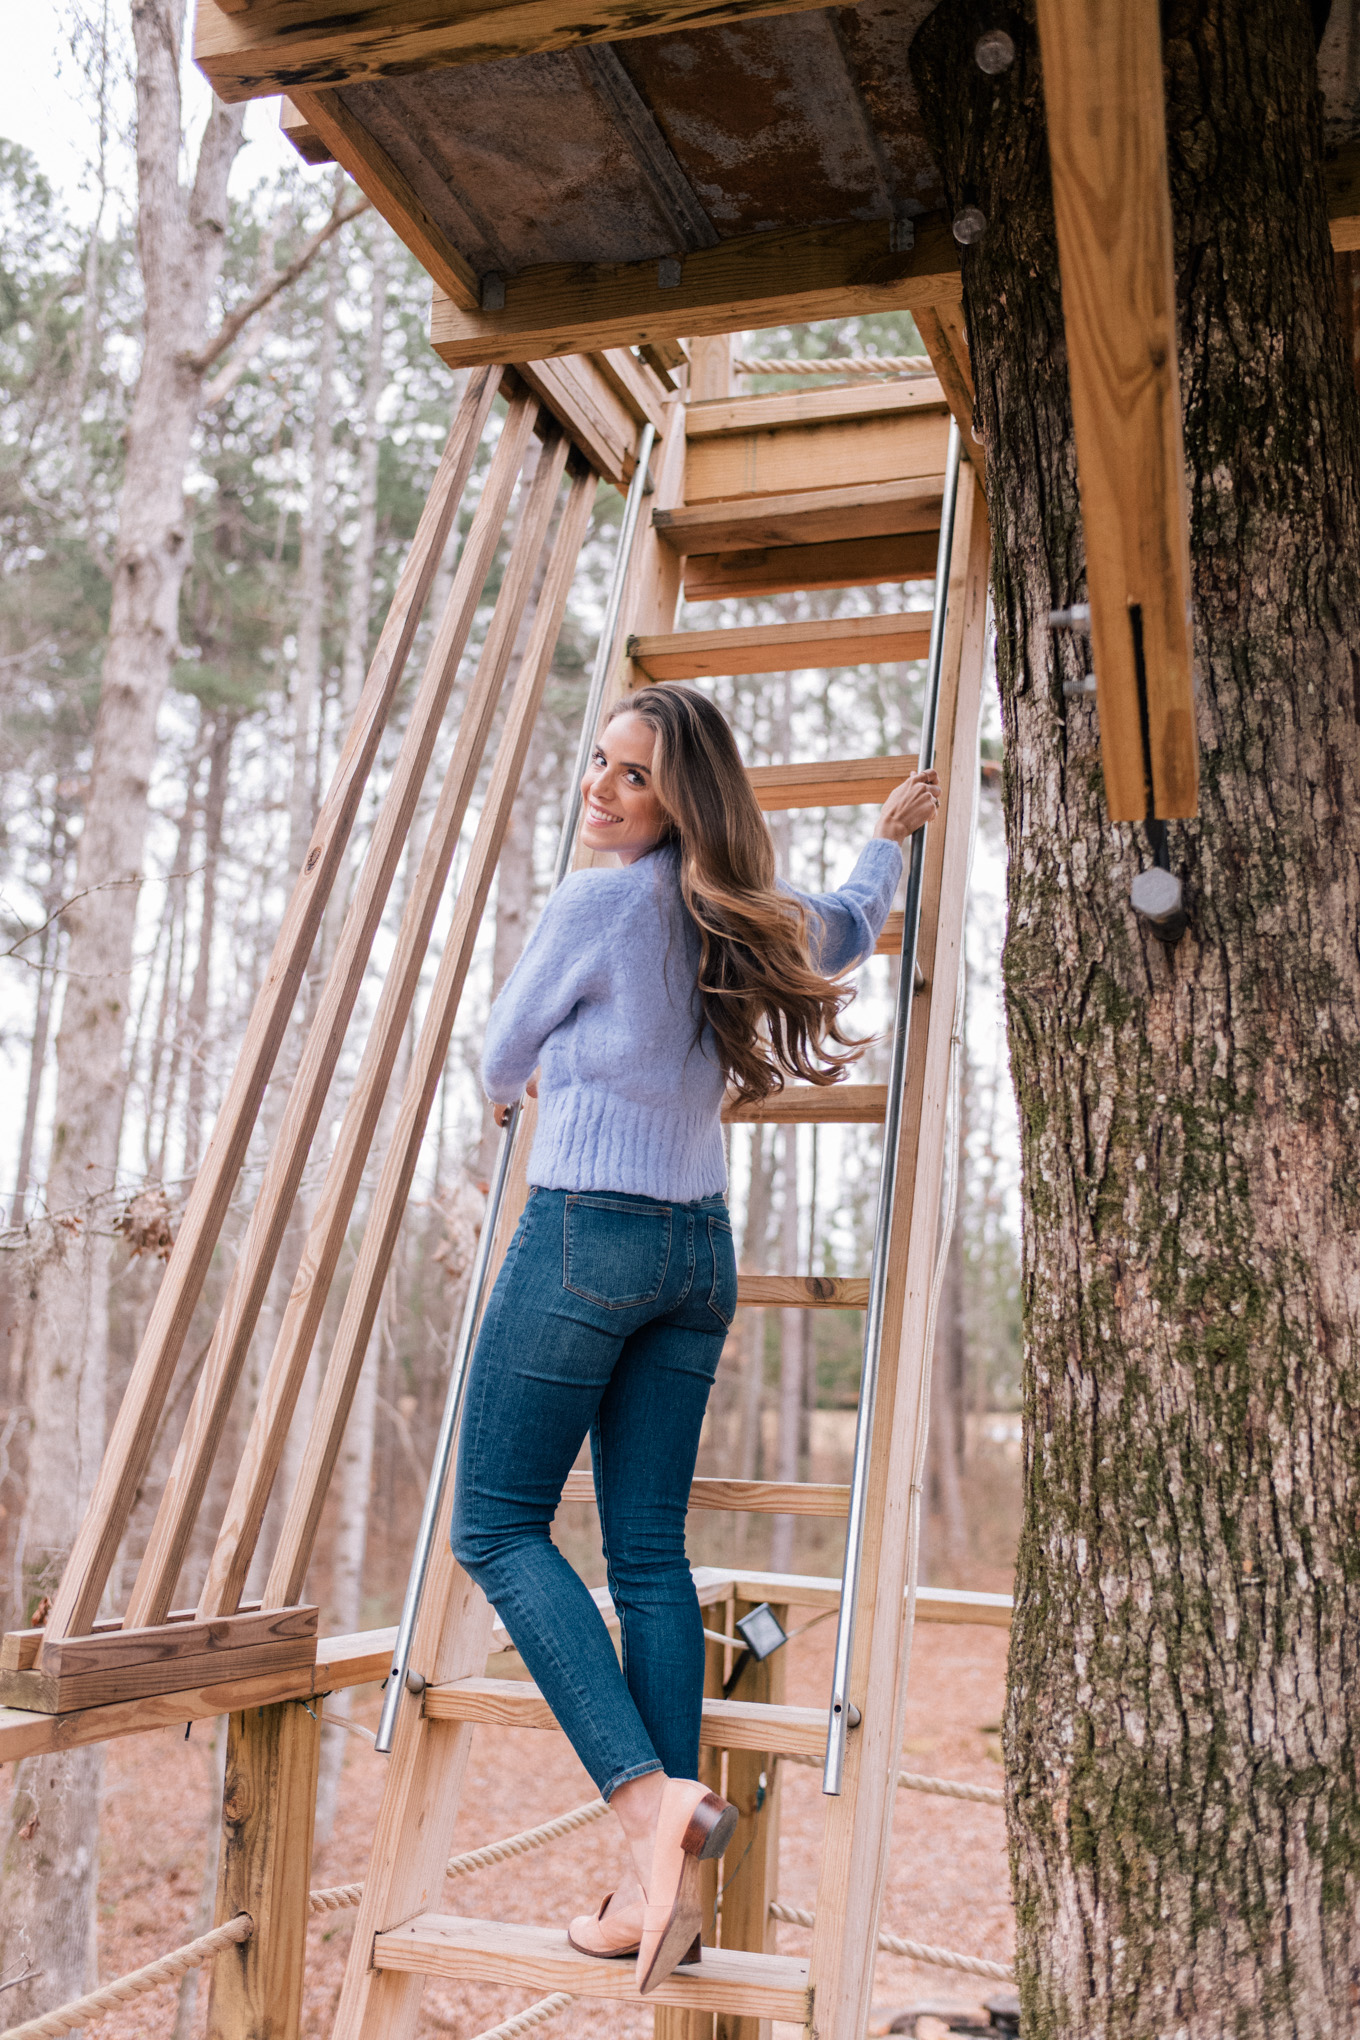 Climbing In A Treehouse